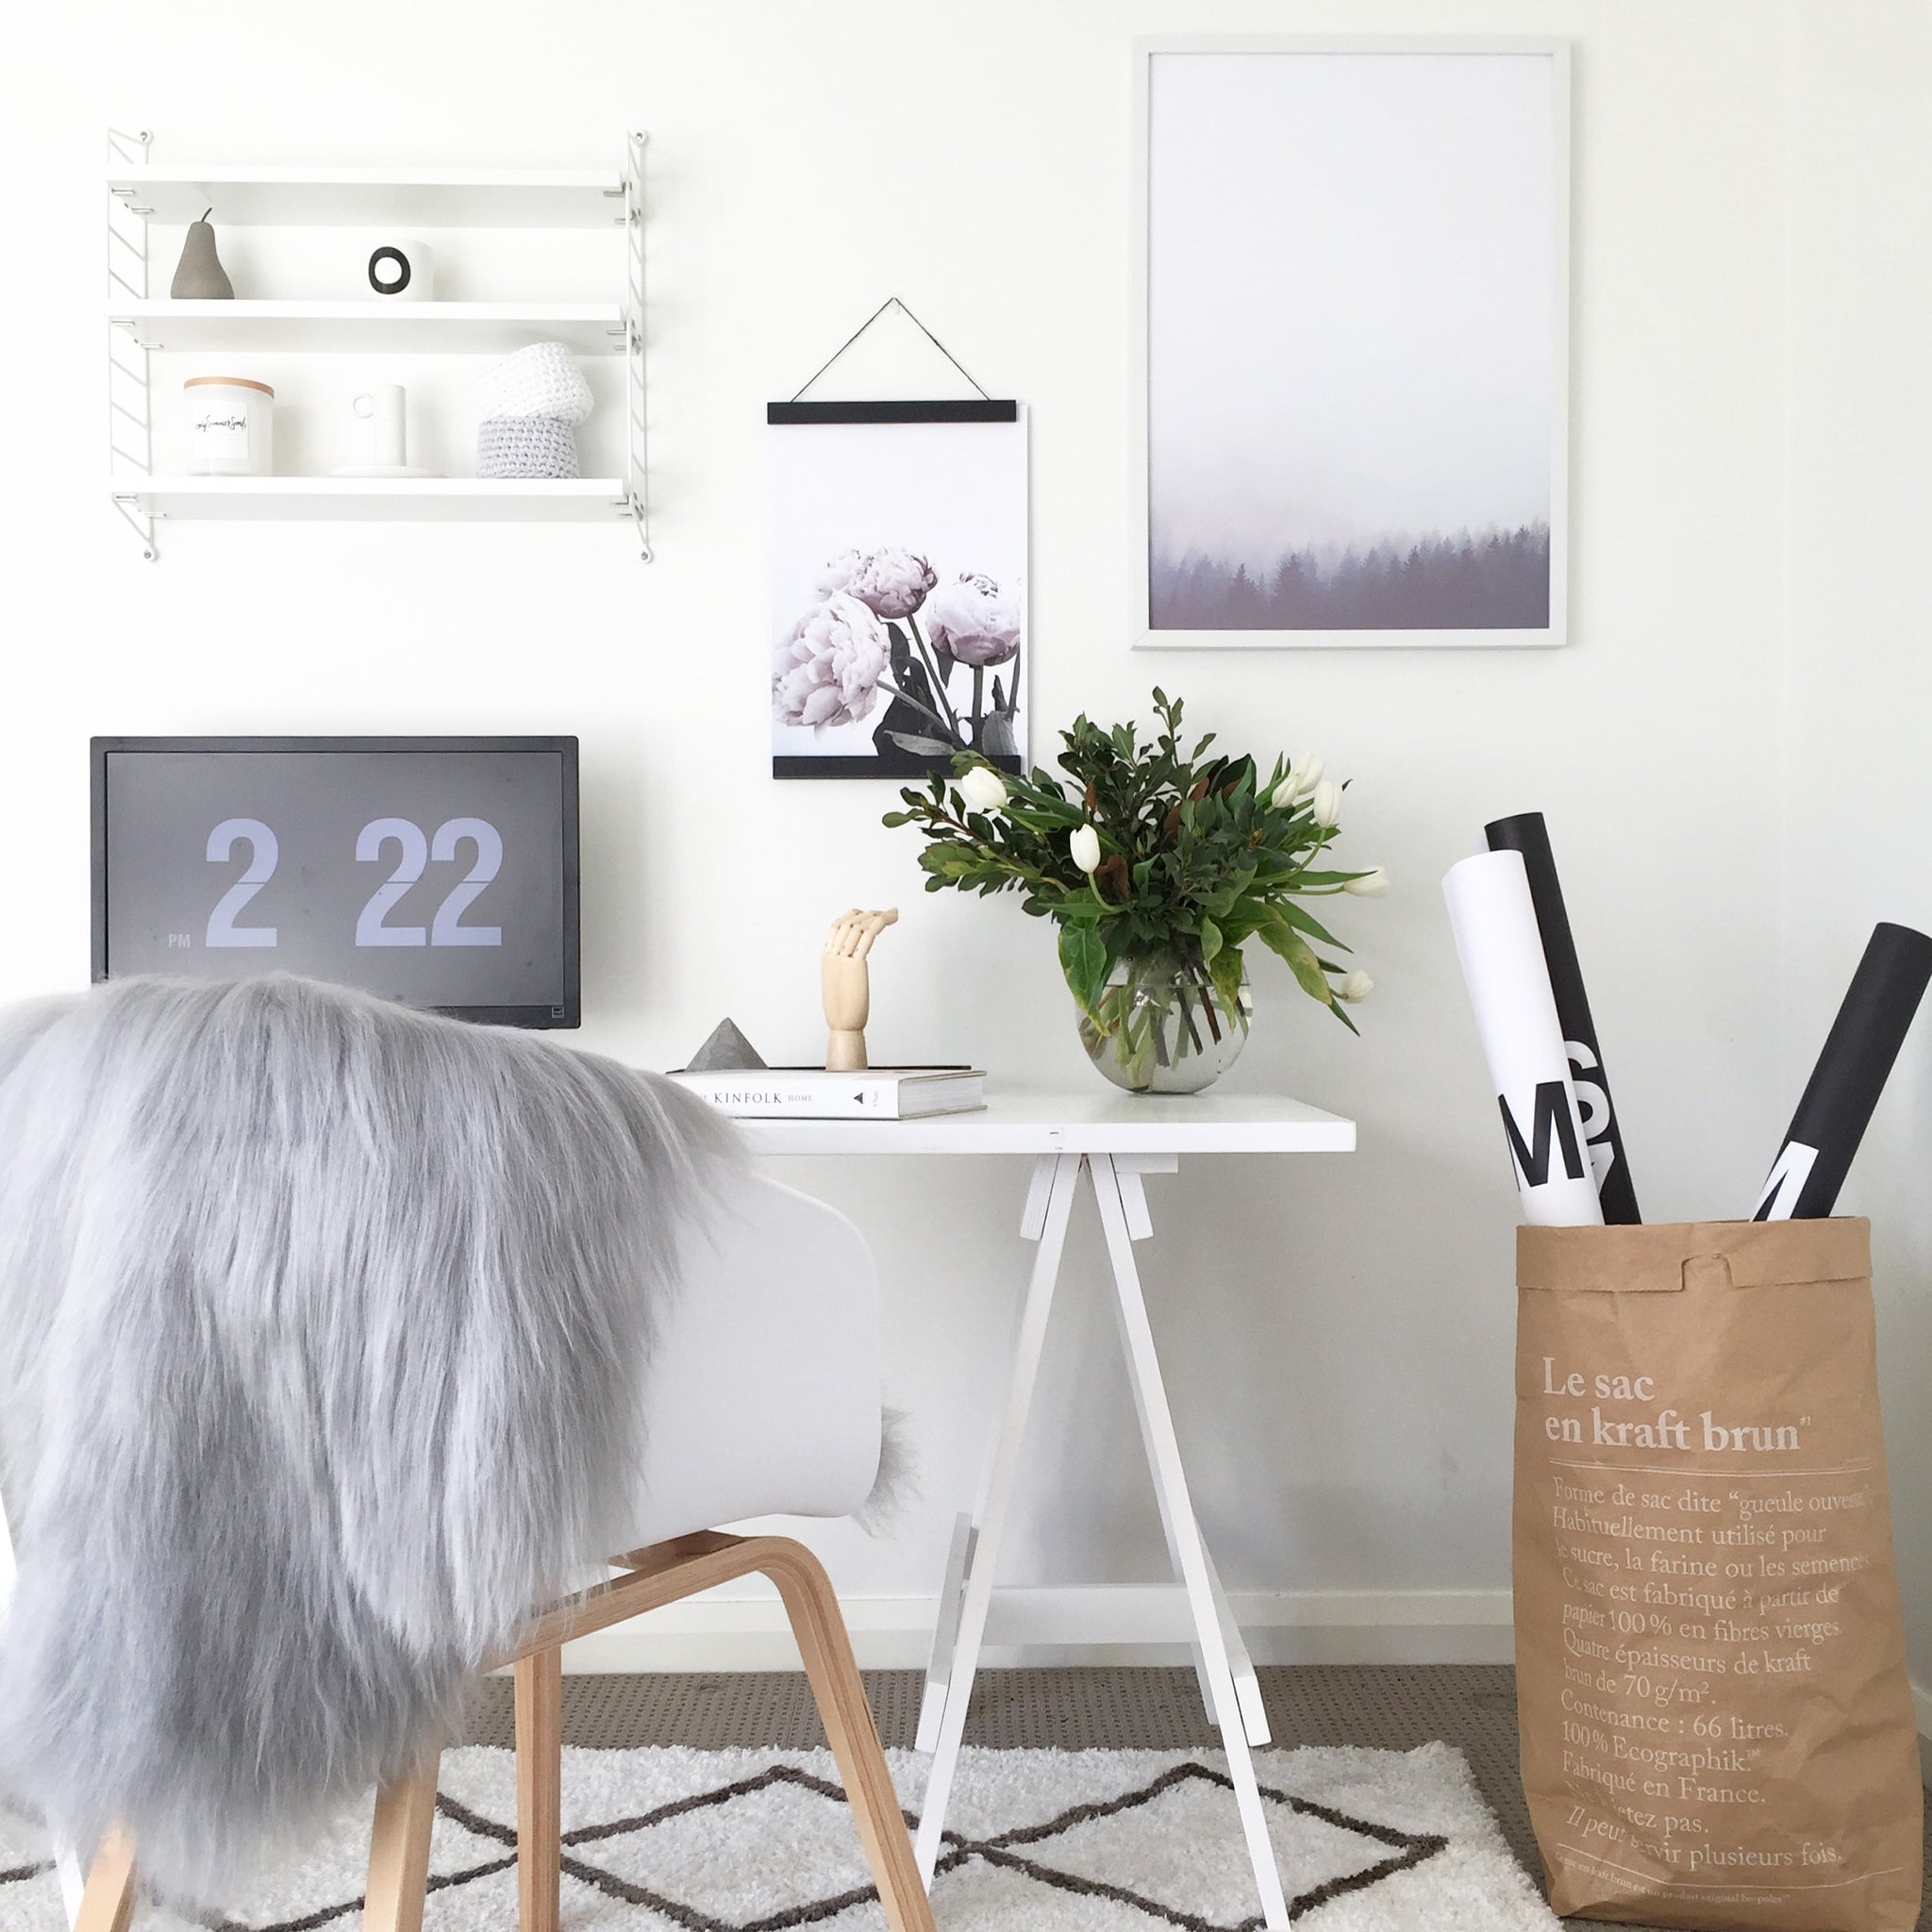 Guest Blog How To Style A Scandinavian Office Space By